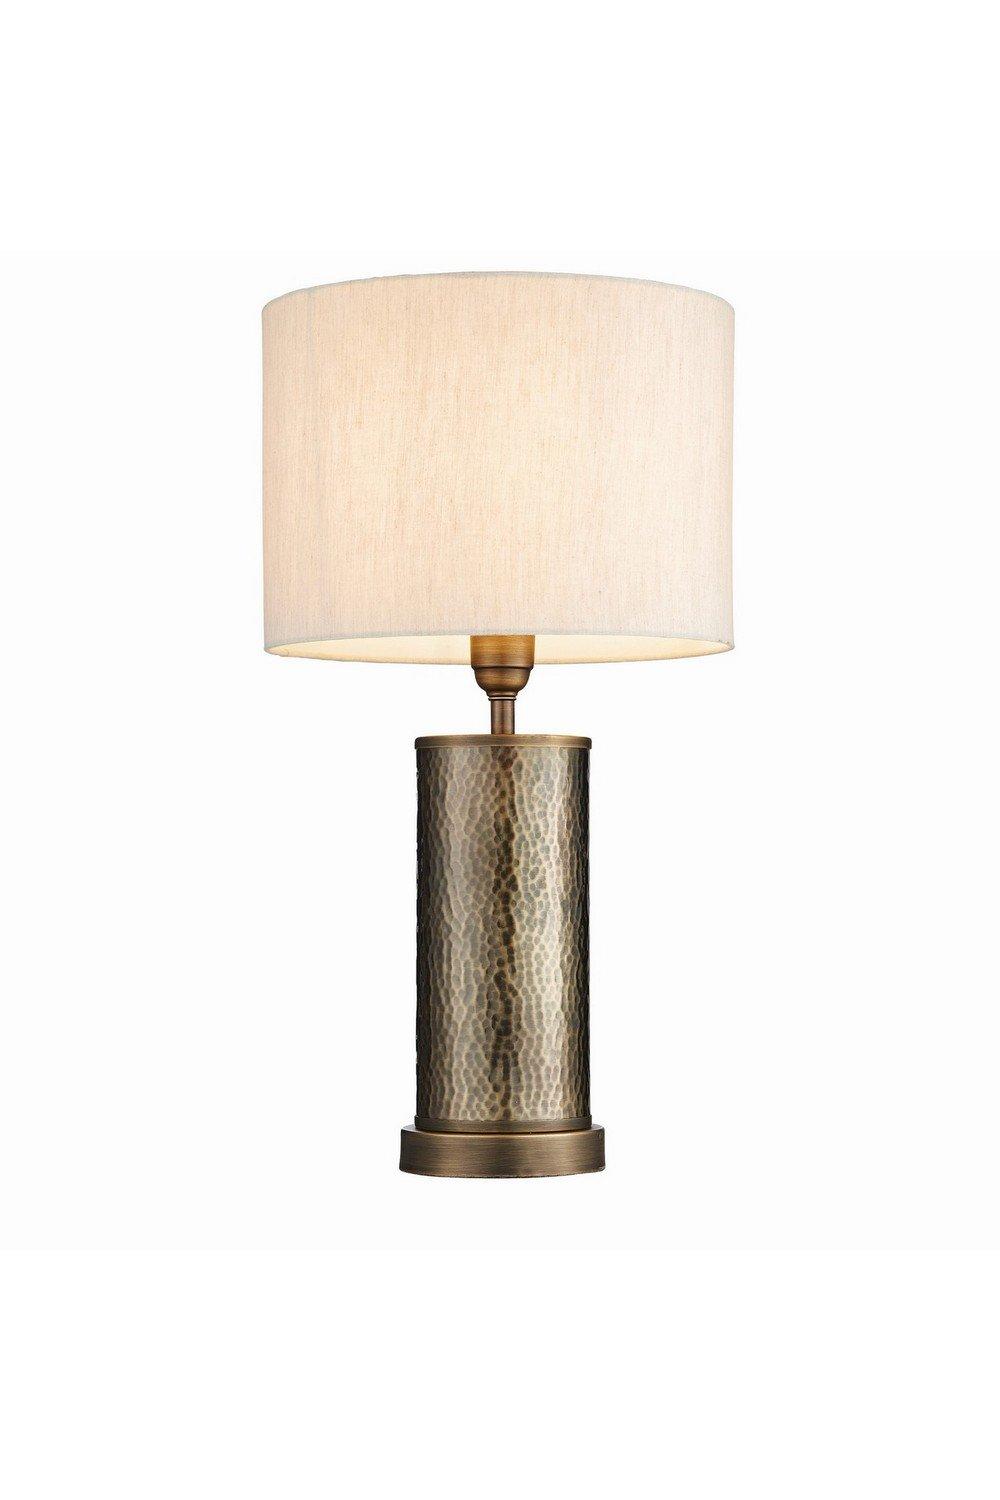 Indara 1 Light Table Lamp Aged Bronze Aged Hammered Bronze Plate E27